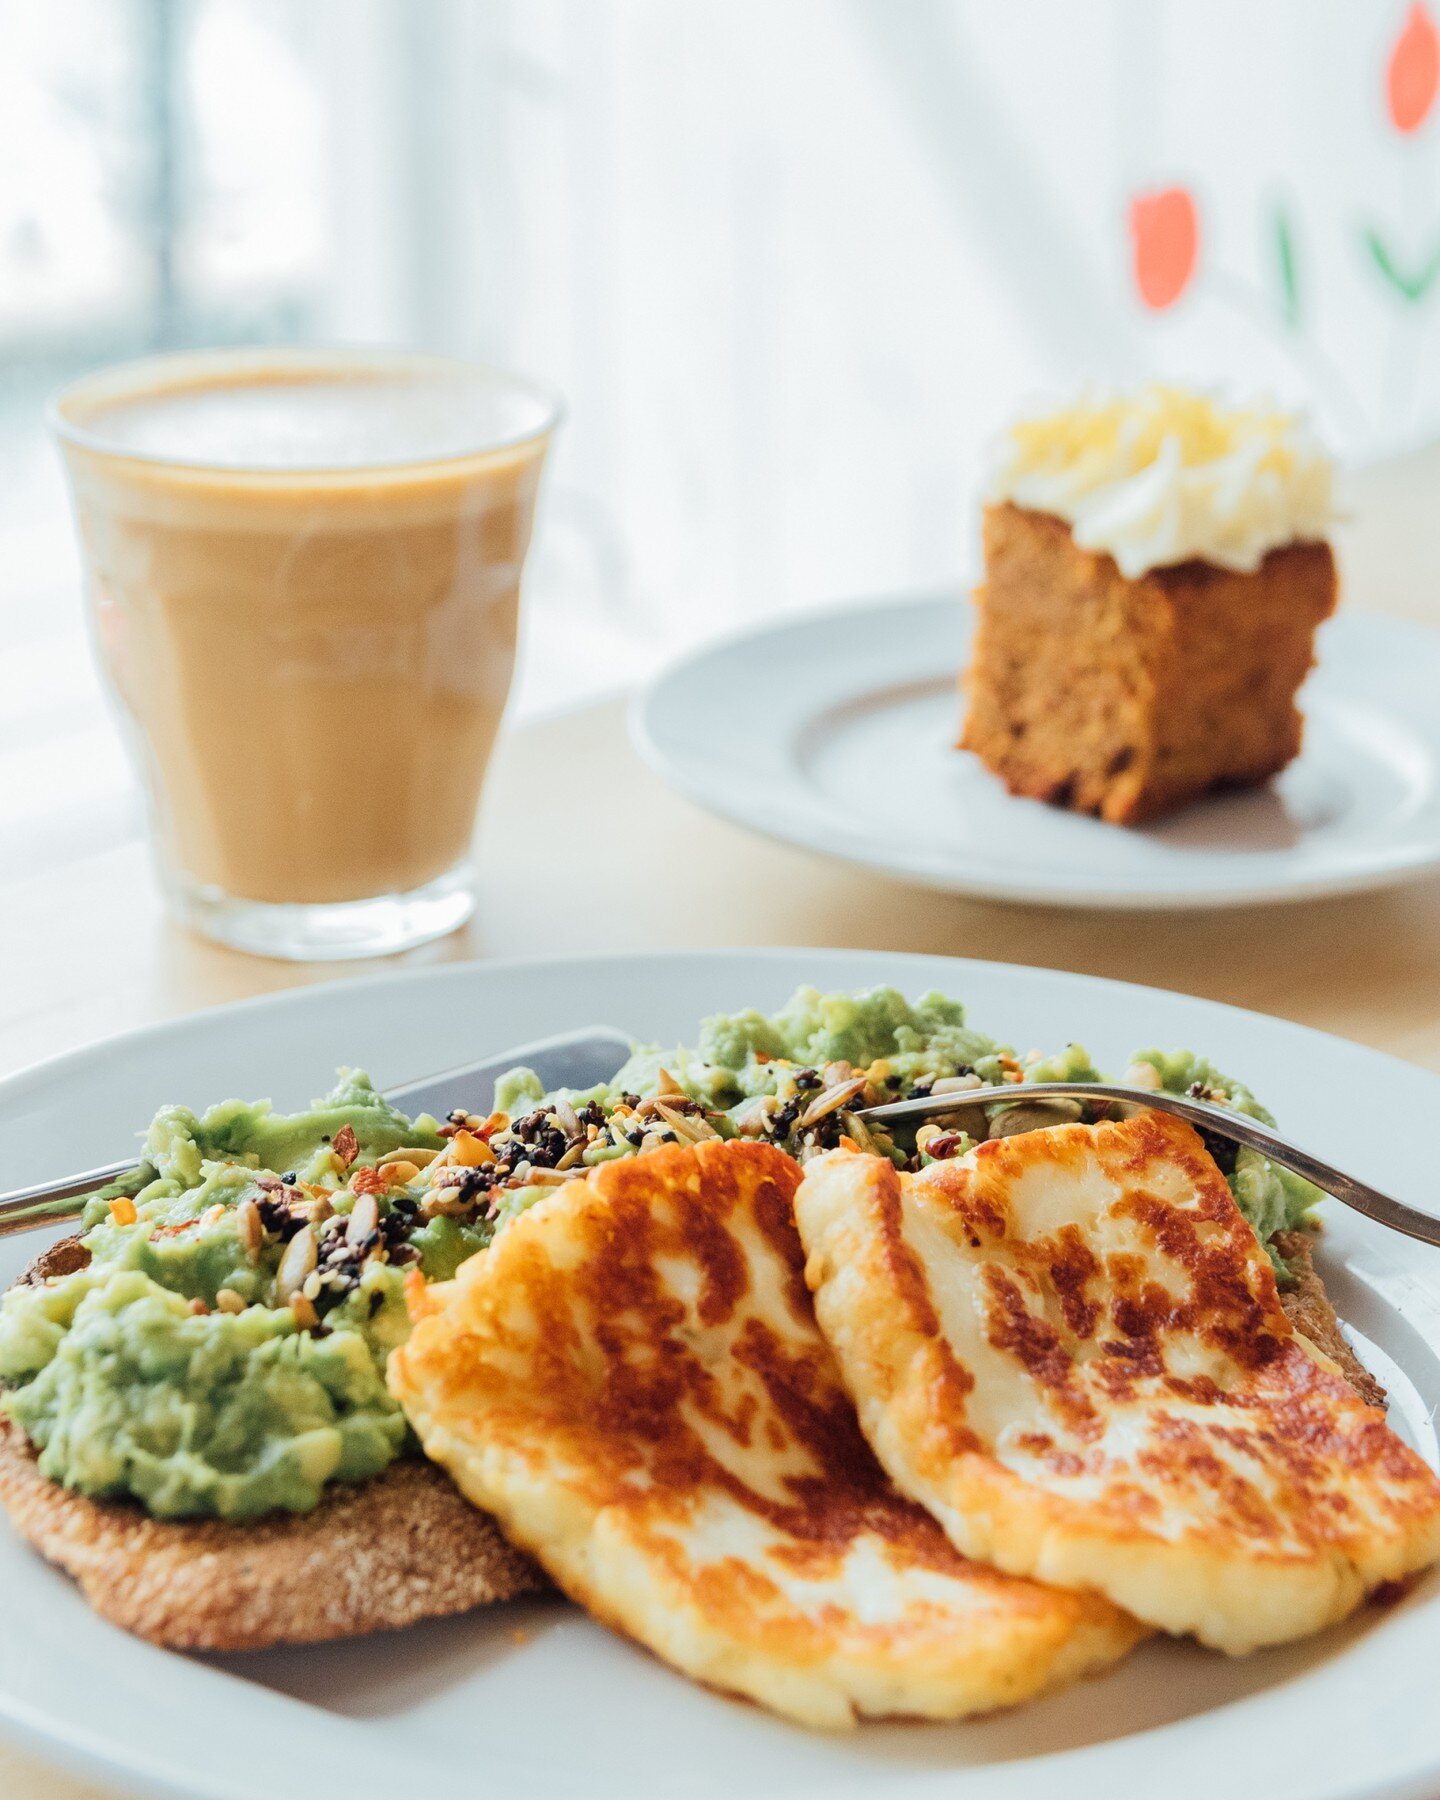 The classic Avo on Toast with Halloumi 😍 extra delicious when paired with a Latte and a piece of Carrot Cake!